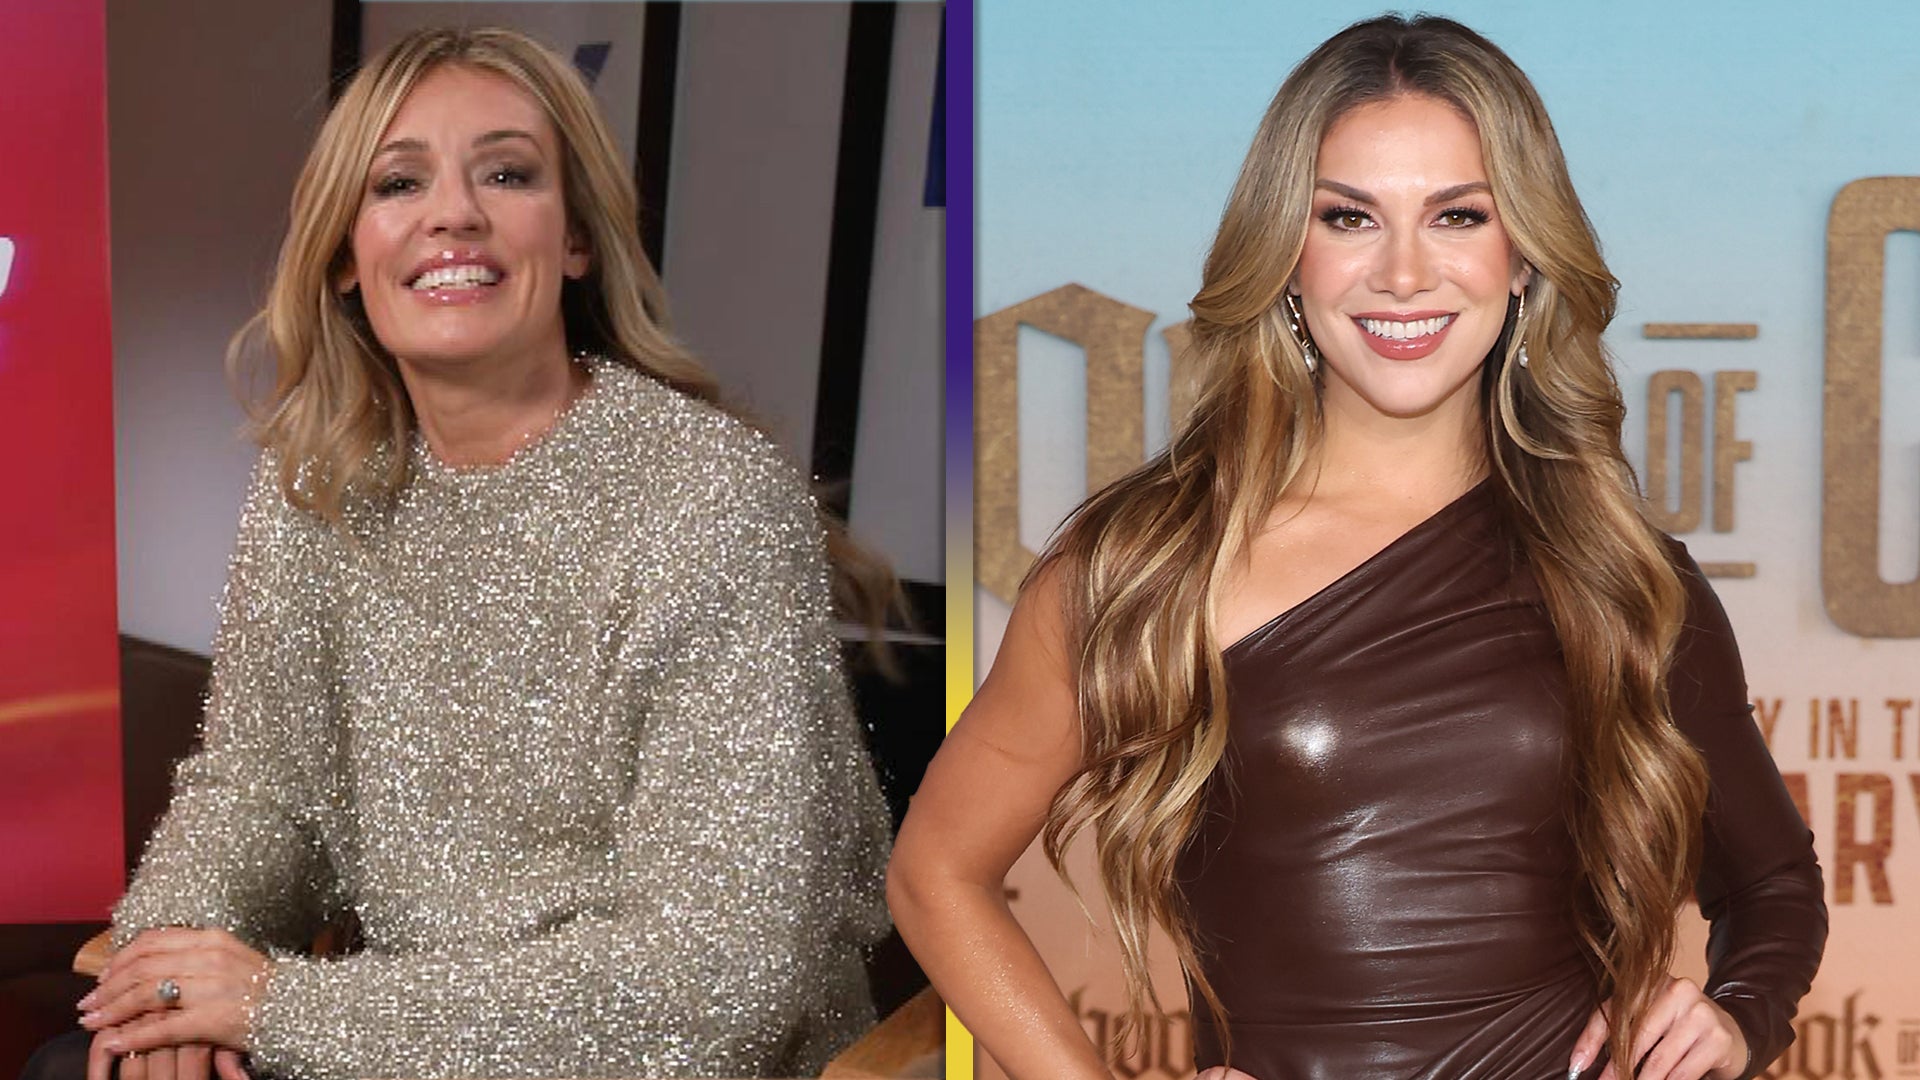 Cat Deeley Reacts to Allison Holker Joining 'SYTYCD' and Bringing tWitch's Memory With Her